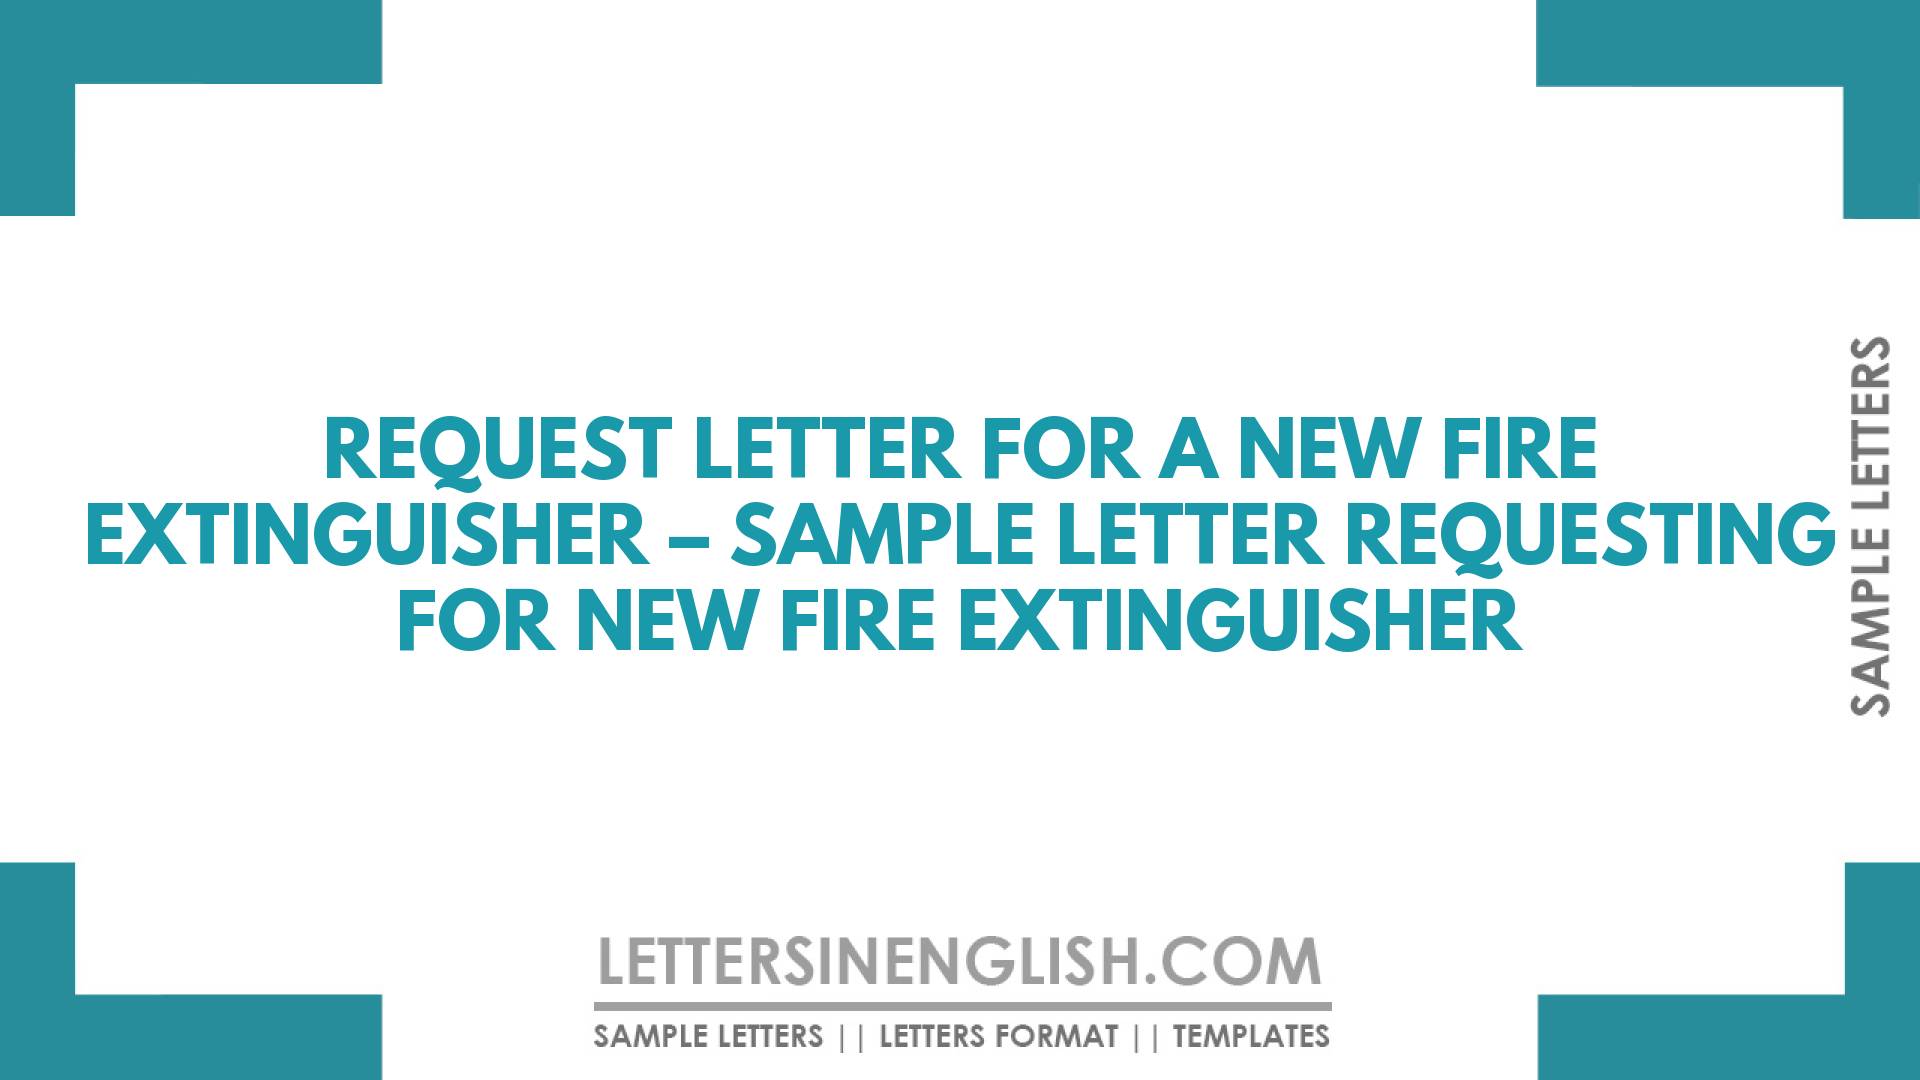 Request Letter for a New Fire Extinguisher – Sample Letter Requesting ...